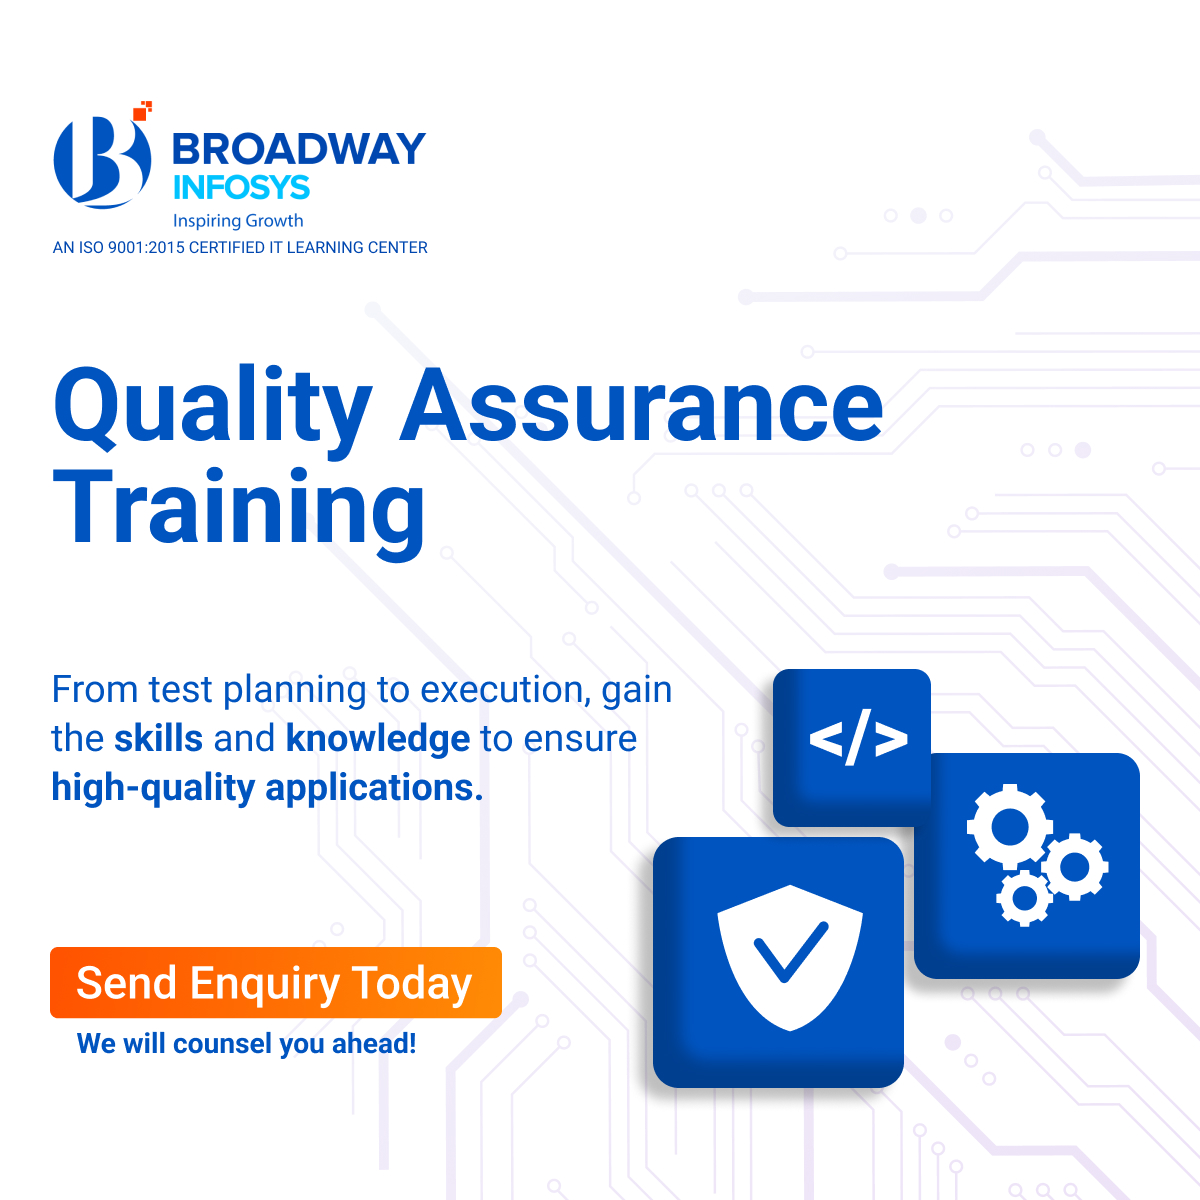 #𝐐𝐮𝐚𝐥𝐢𝐭𝐲𝐀𝐬𝐬𝐮𝐫𝐚𝐧𝐜𝐞𝐓𝐫𝐚𝐢𝐧𝐢𝐧𝐠

Elevate your career with our professional Quality Assurance (QA) Training! 

Join us now! 
Enquiry: broadwayinfosys.com/enquiry 

#QATraining  #QualityAssurance #Internship #JobPlacementAssistance #ITTraininginNepal #BroadwayInfosys